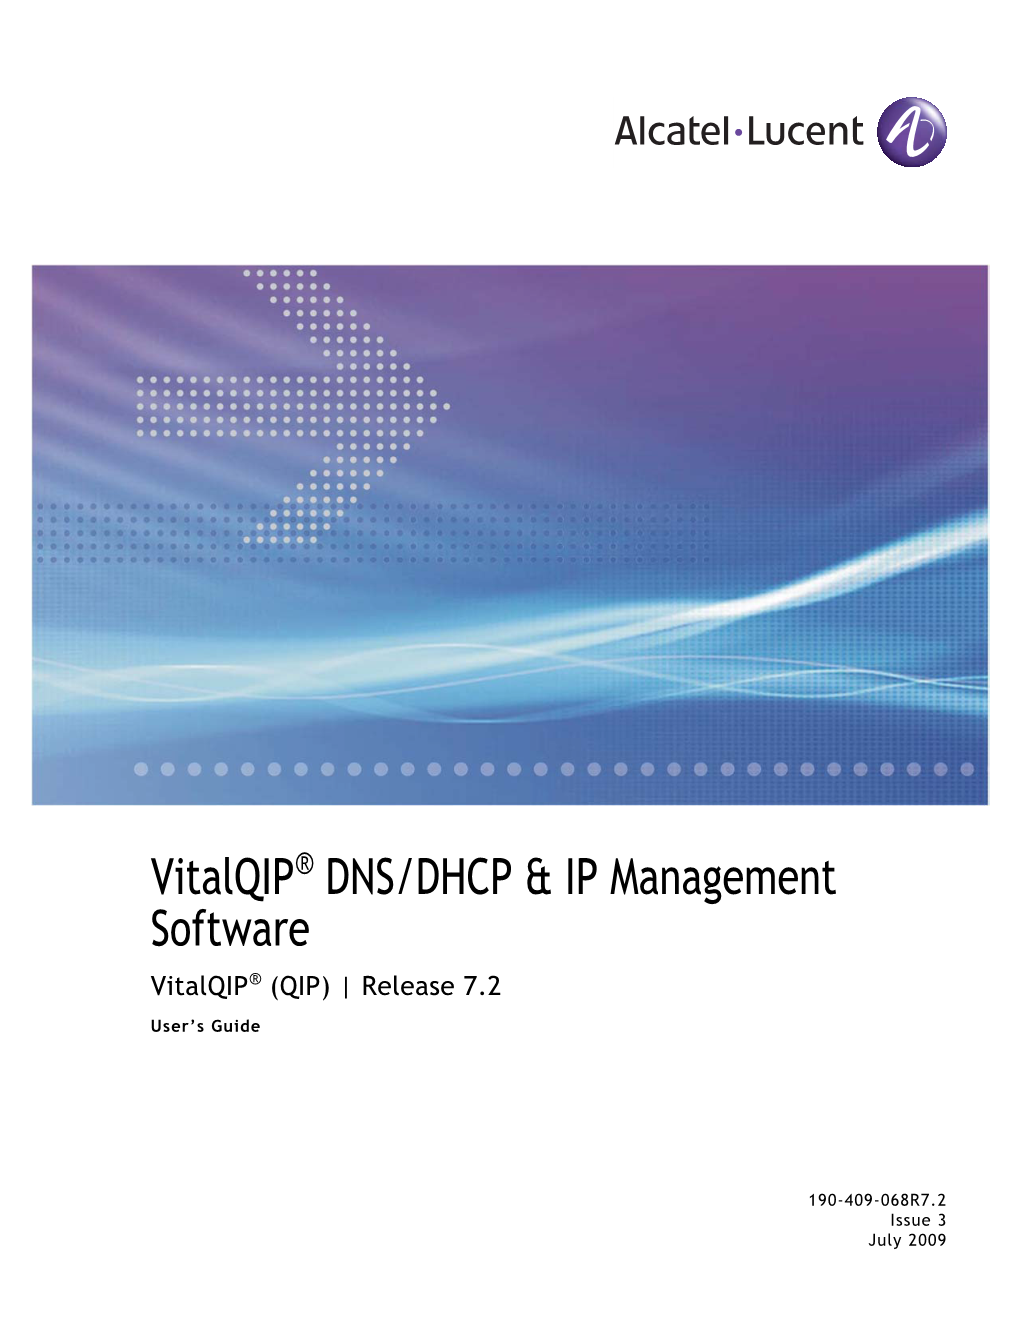 Vitalqip® DNS/DHCP & IP Management Software